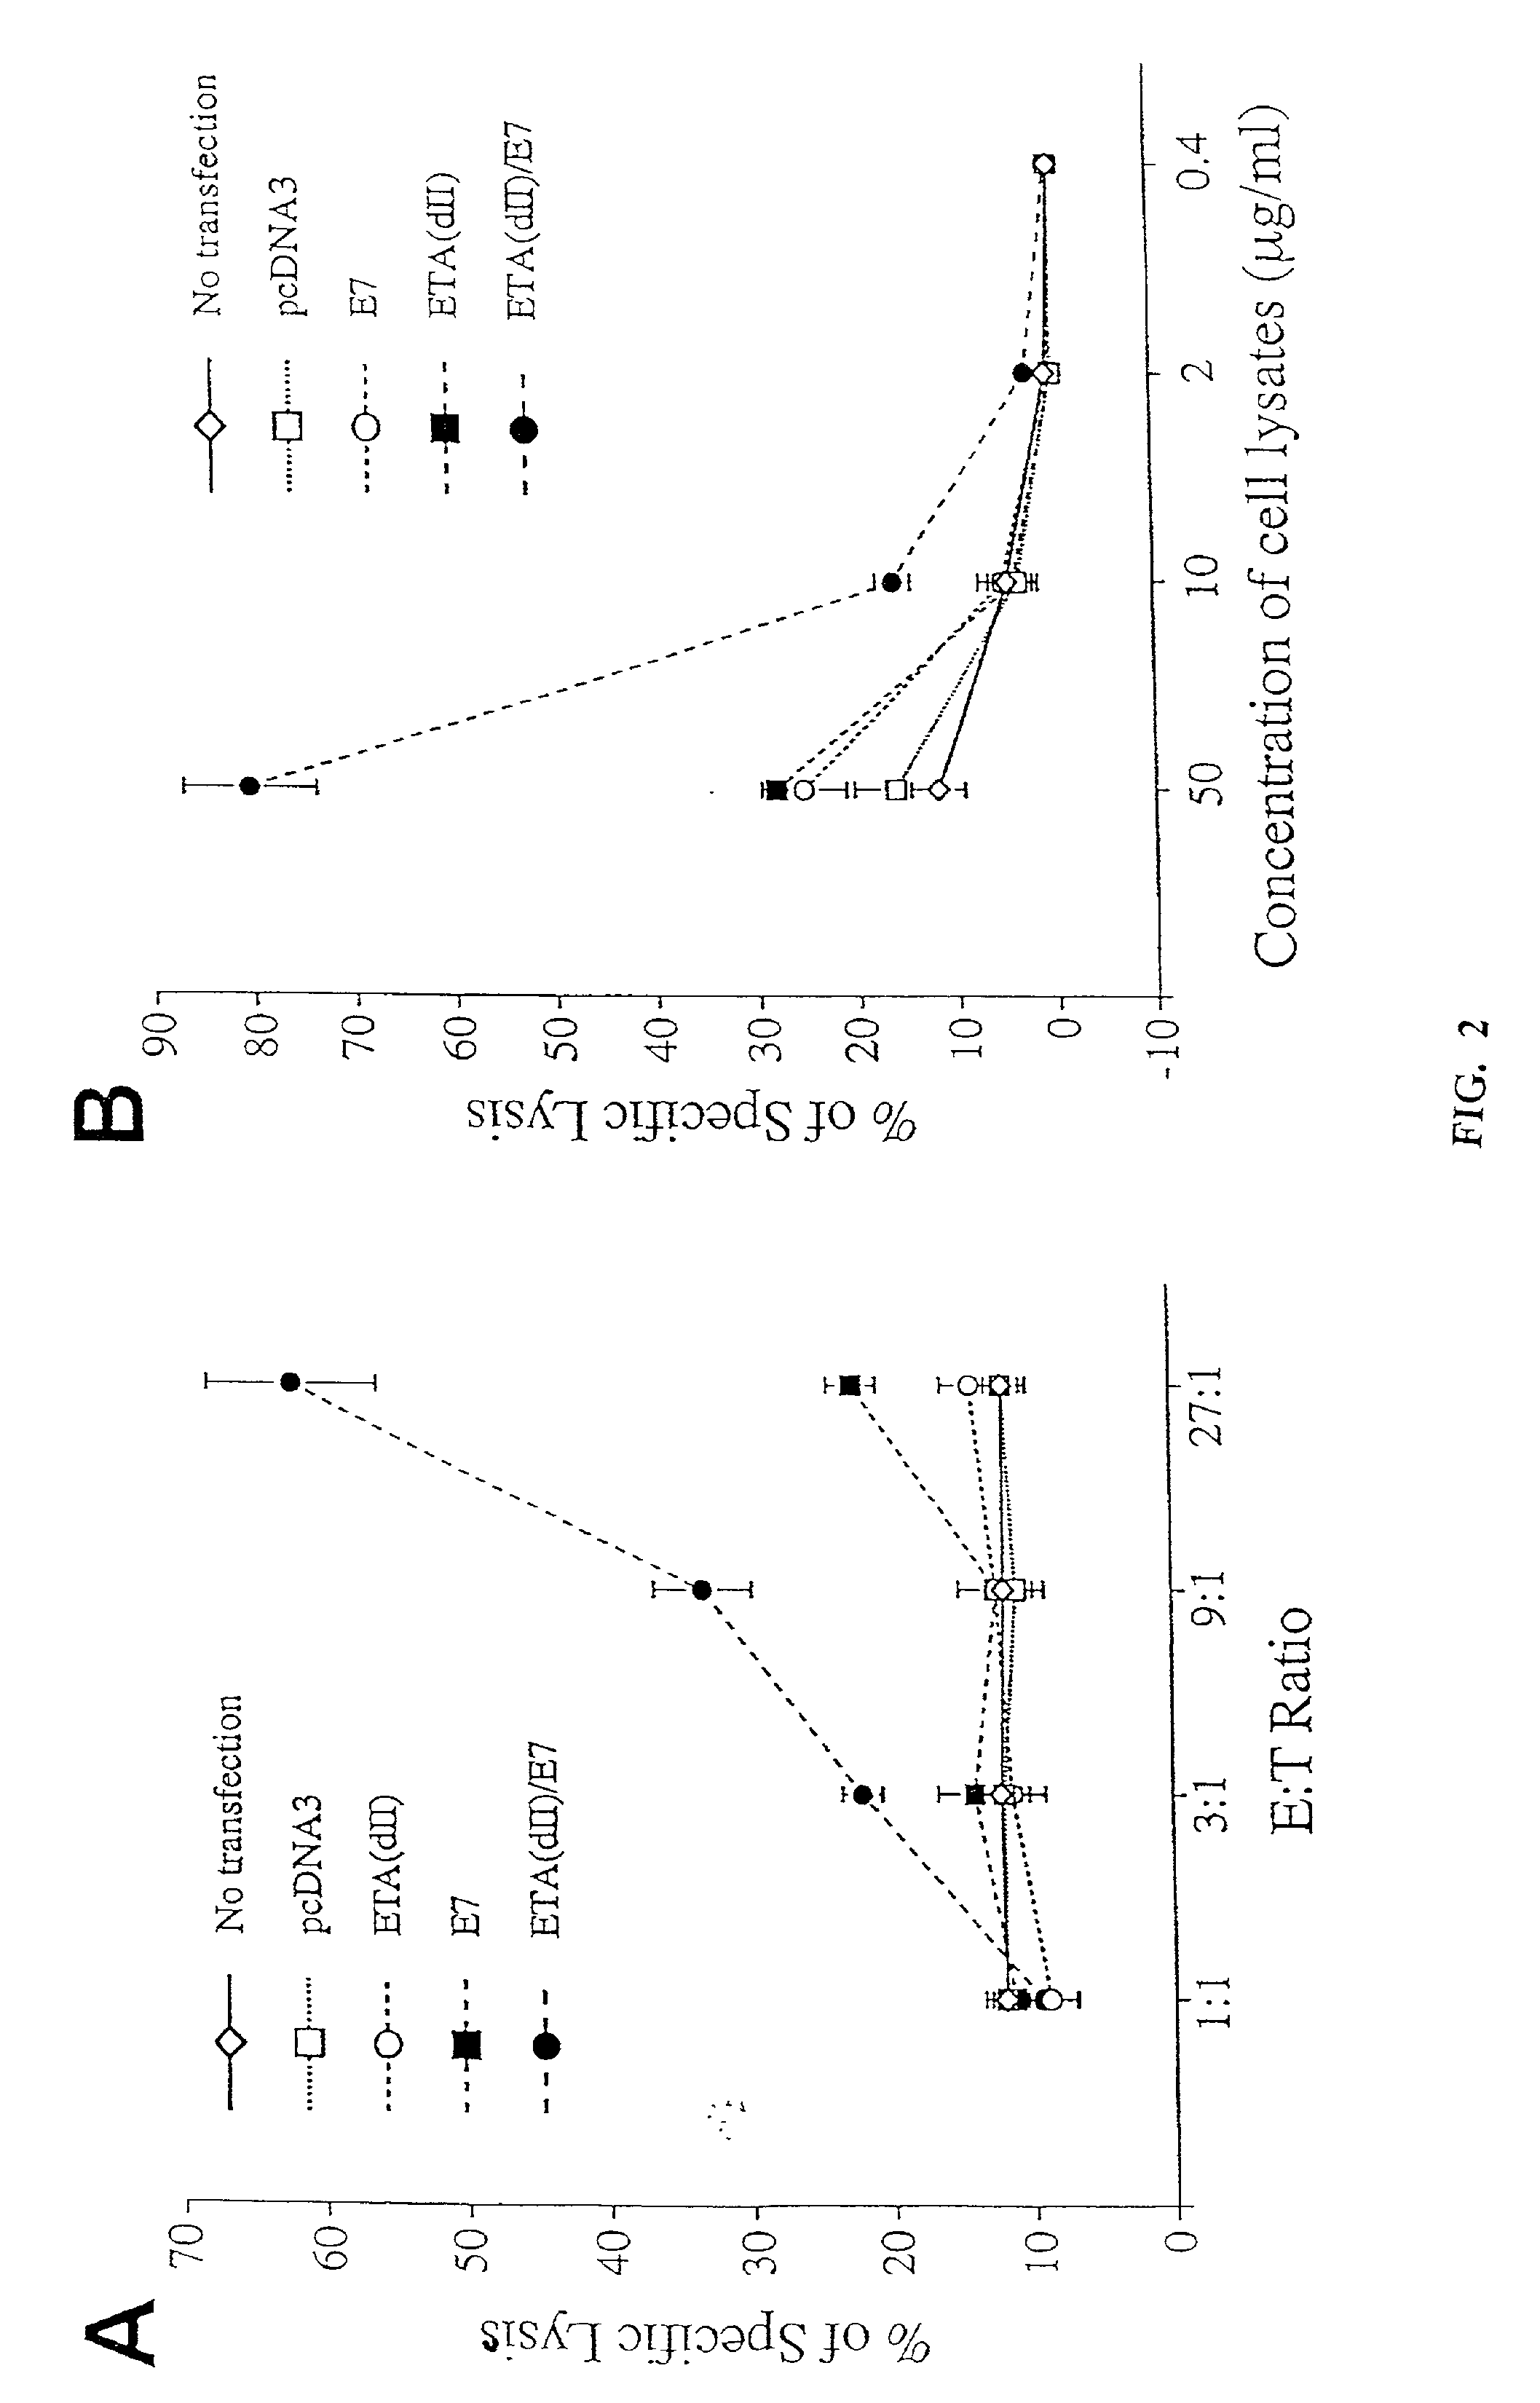 Superior molecular vaccine linking the translocation domain of a bacterial toxin to an antigen